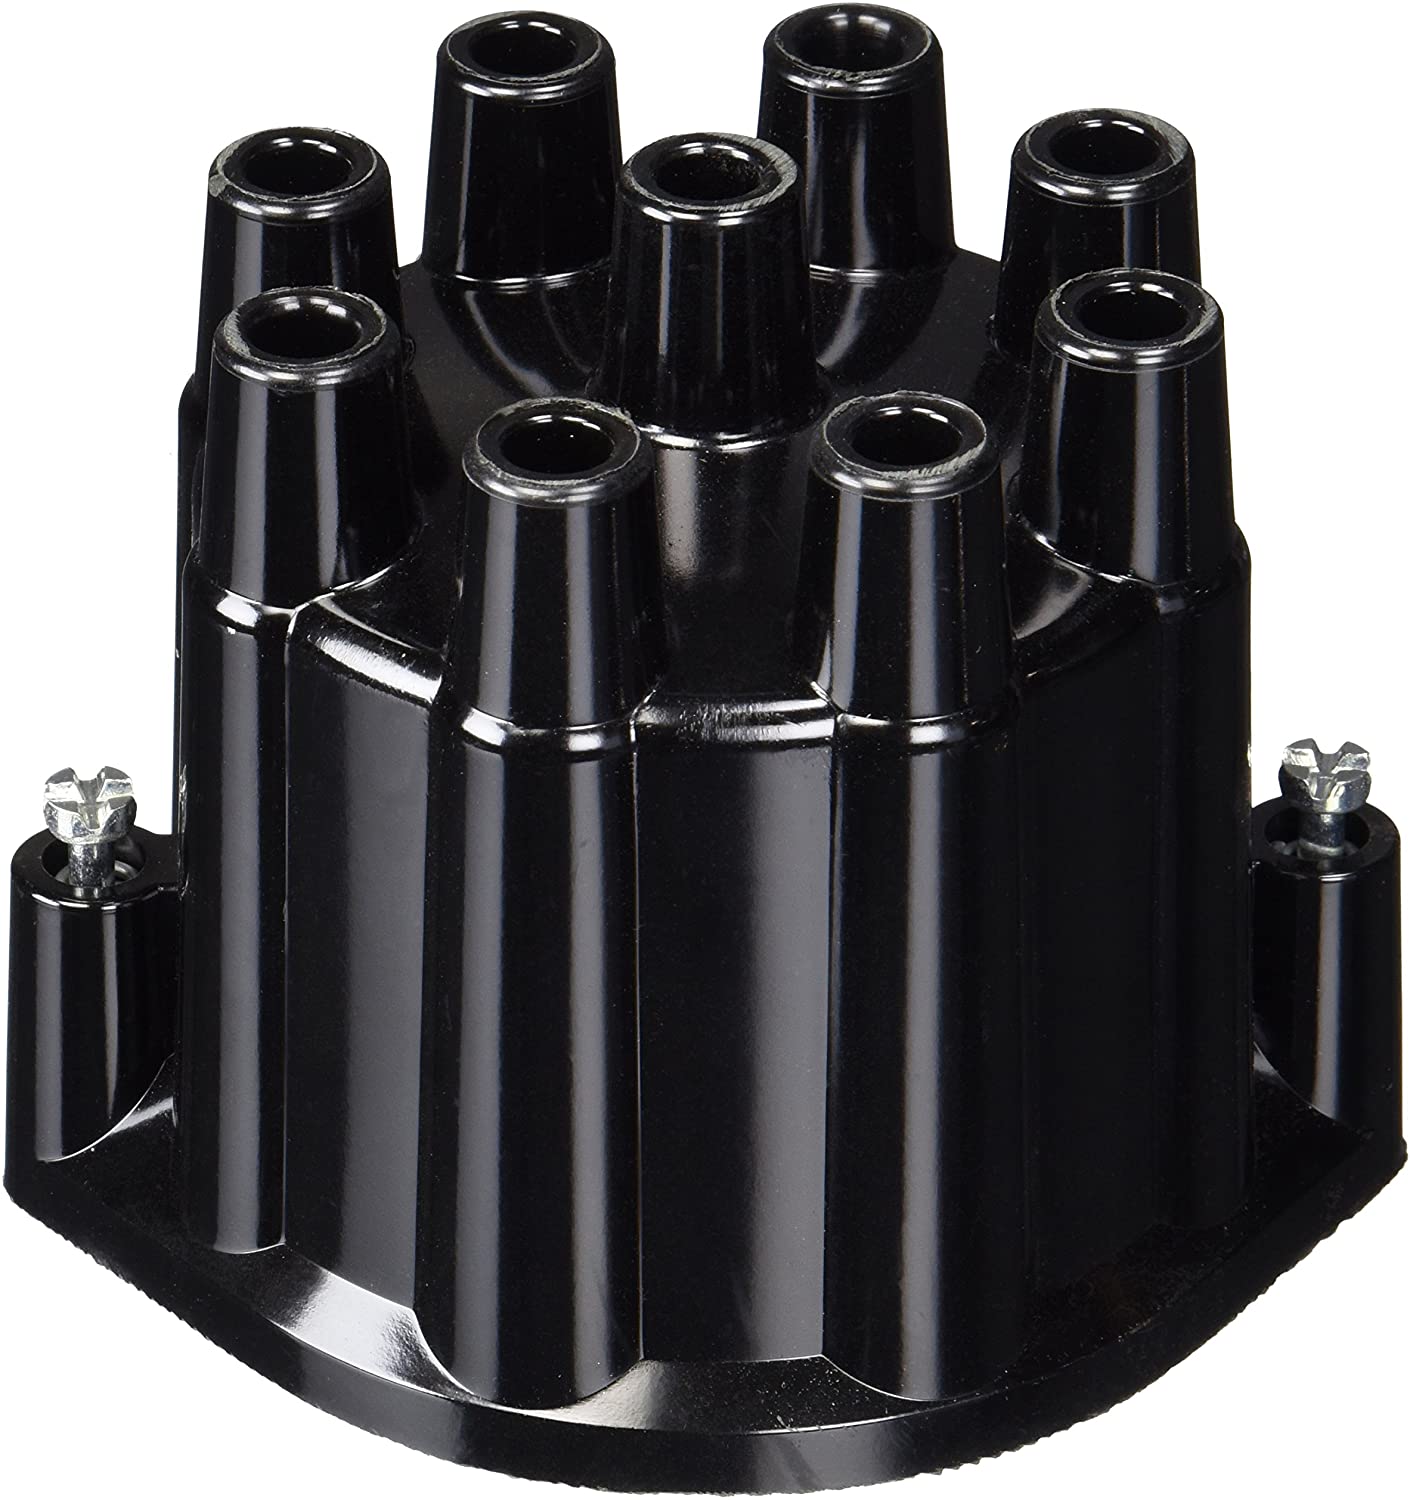 Standard Motor Products DR429T Distributor Cap